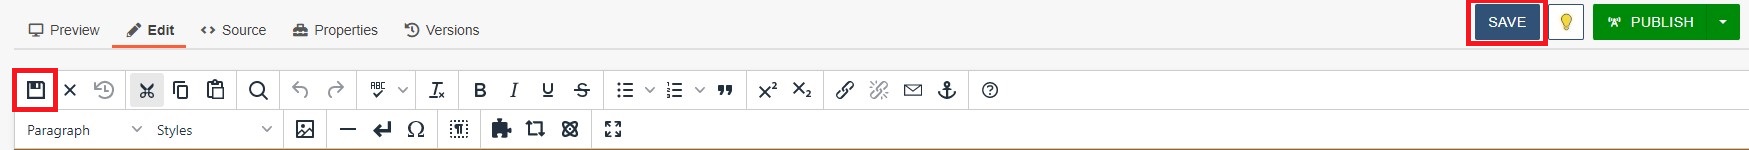 Toolbar with Save Highlighted